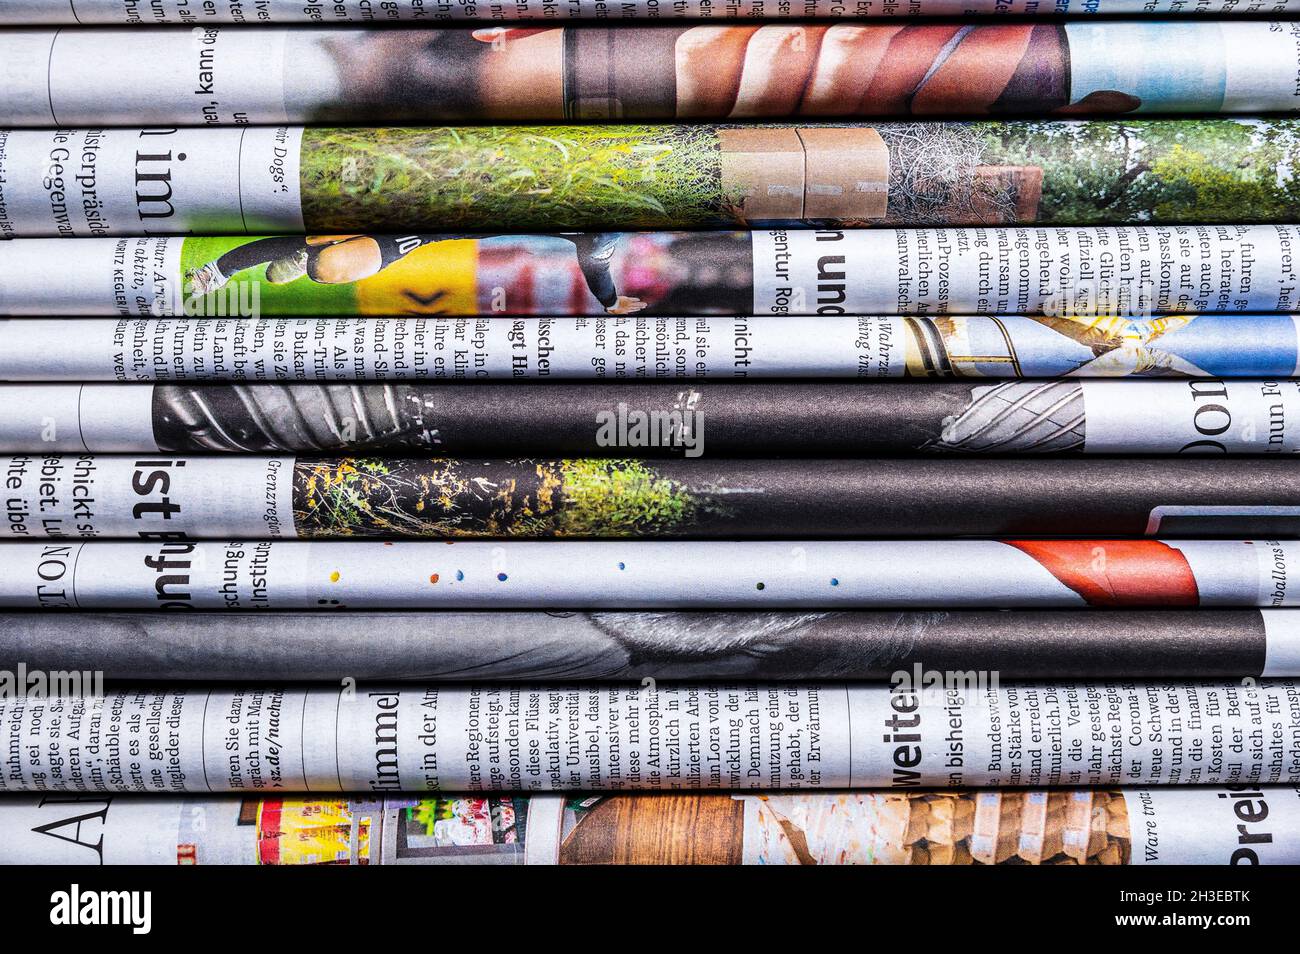 Latest News Concept: A stack of folded newspapers Stock Photo